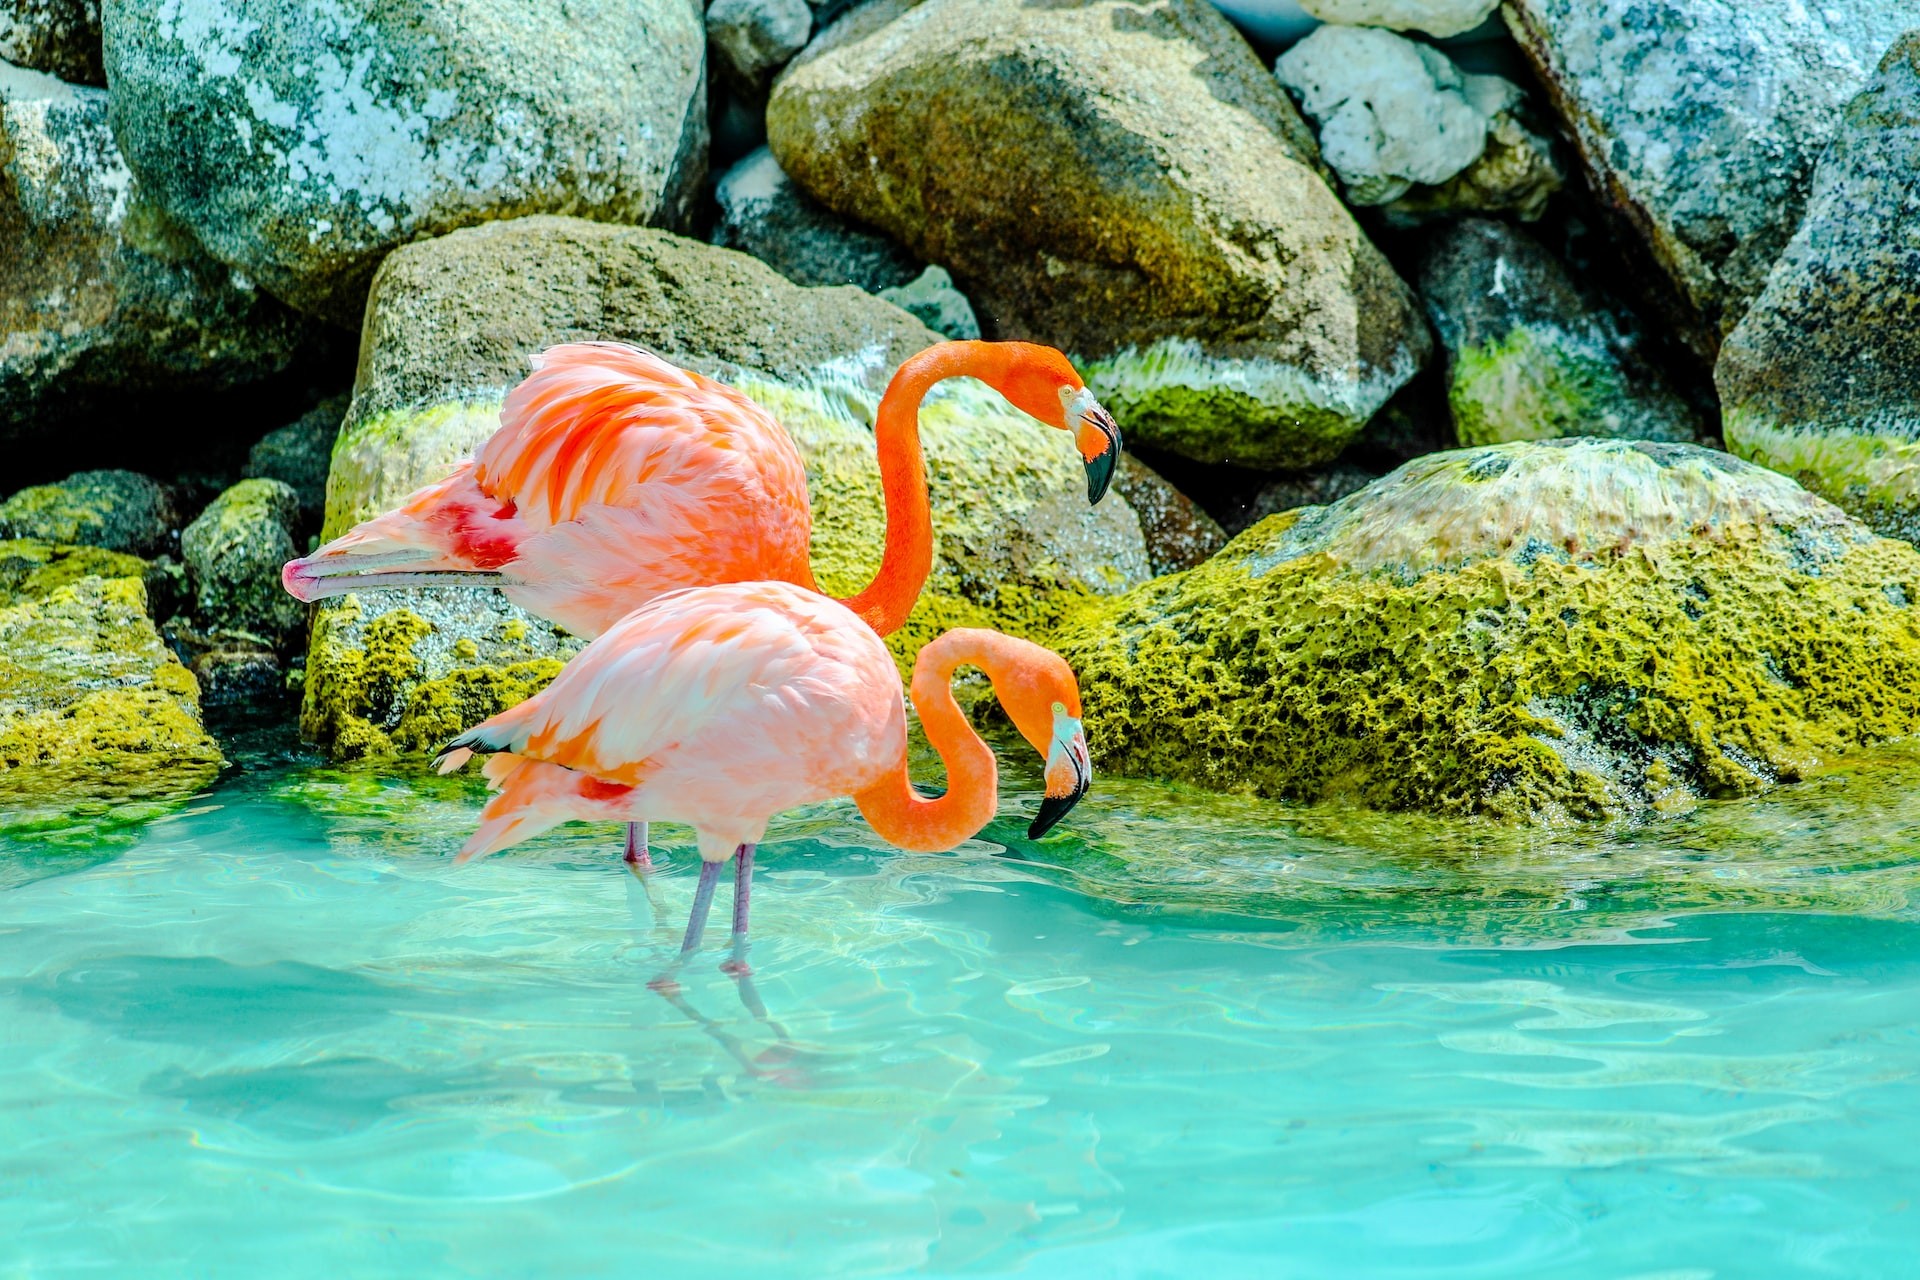 Other Fantastic Aruba places to visit